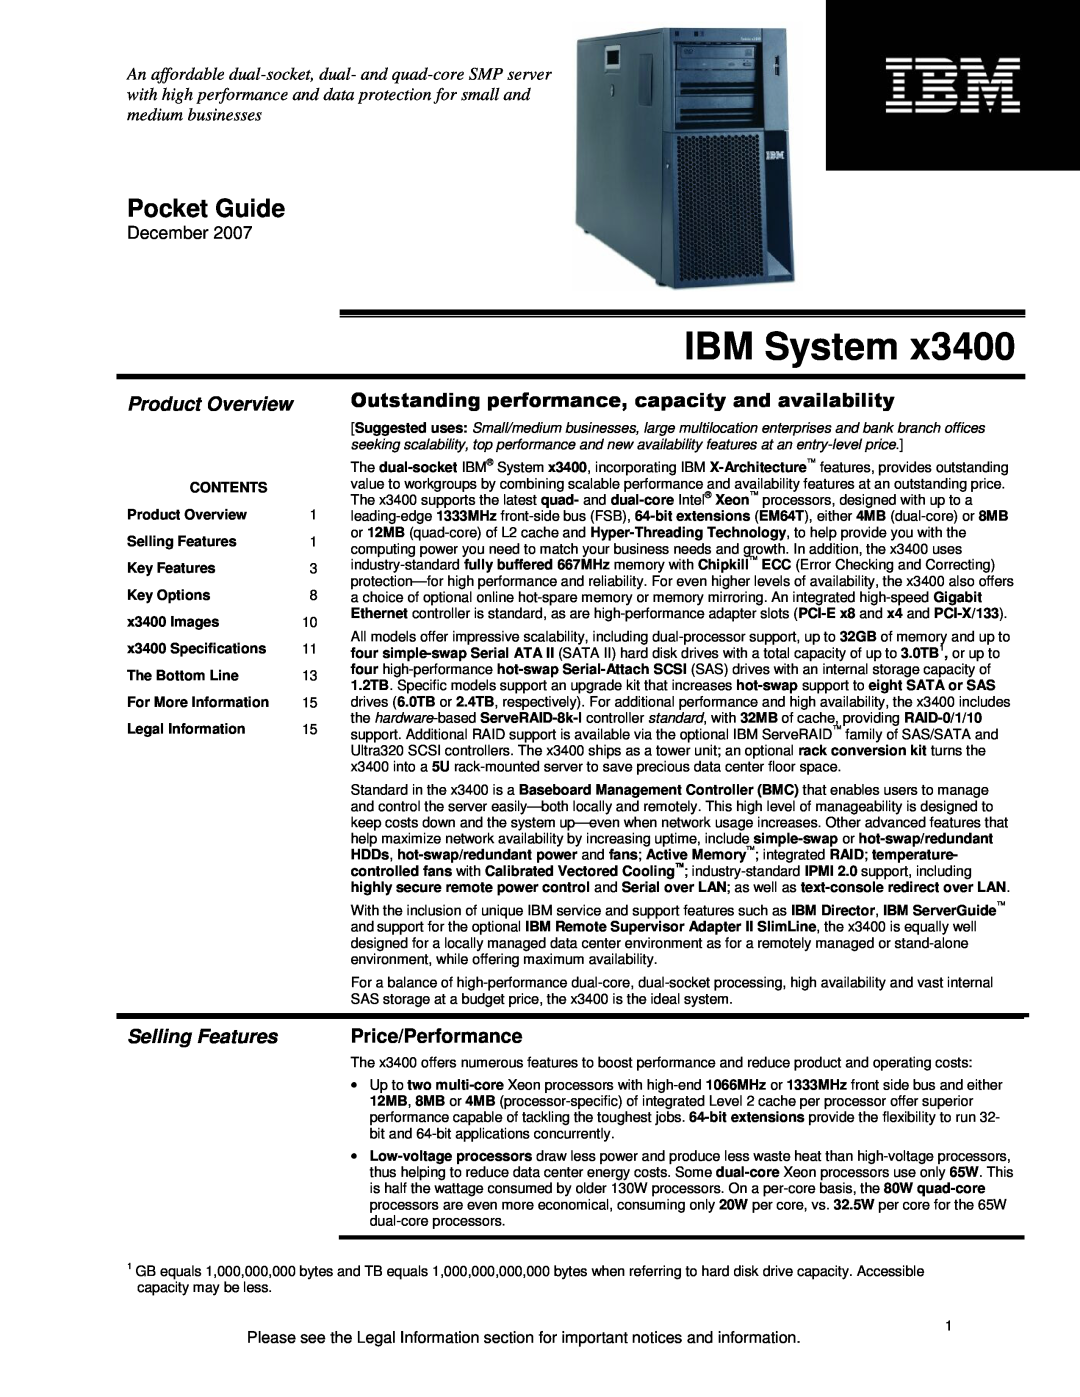 IBM x3400 specifications Product Overview, Selling Features, Price/Performance, October, IBM System, Product Guide 